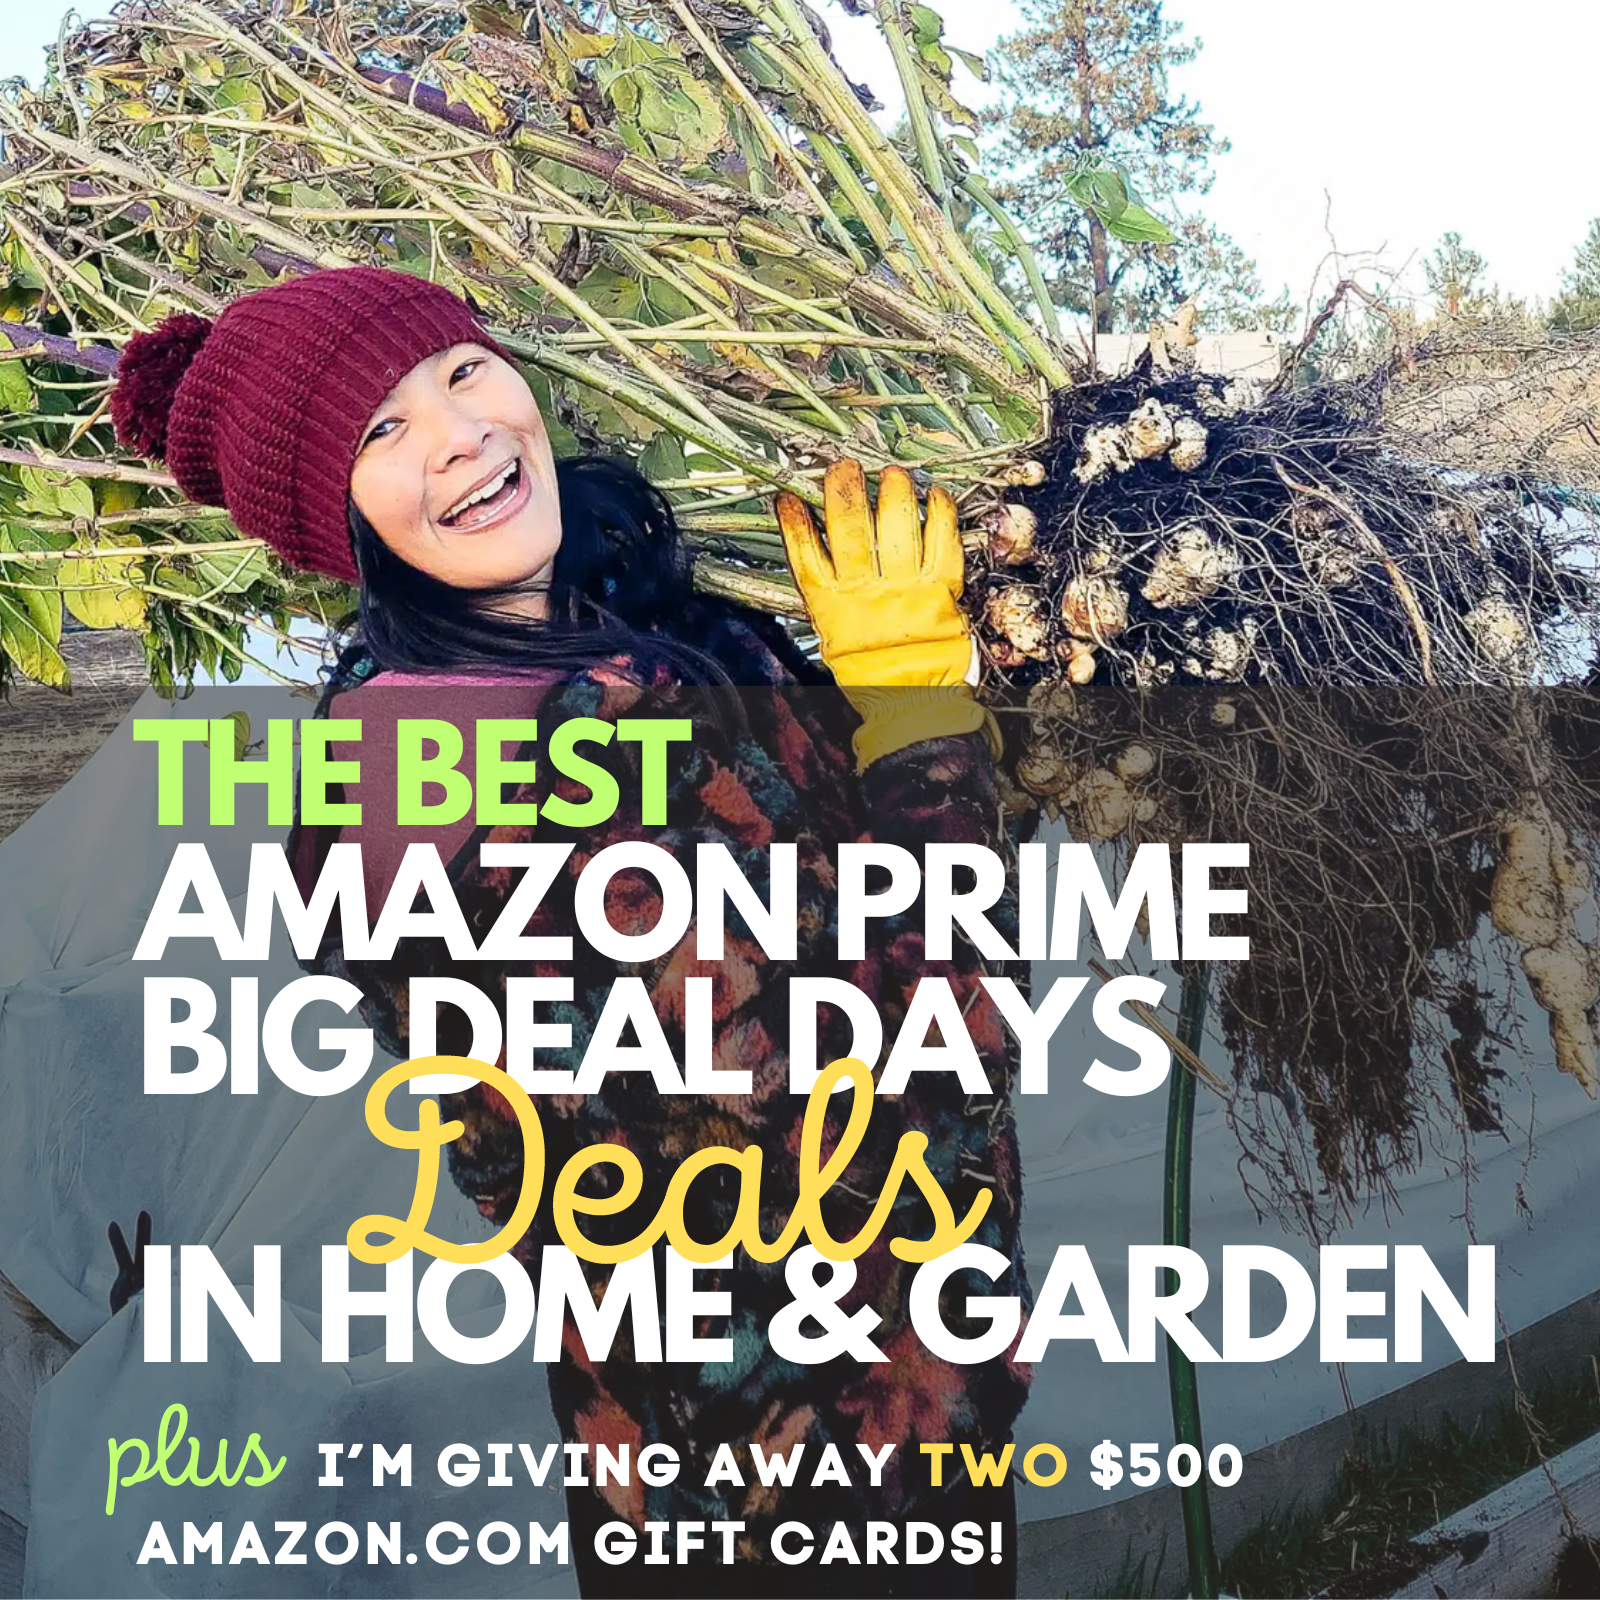 Best home and garden deals during Amazon Prime Big Deal Days